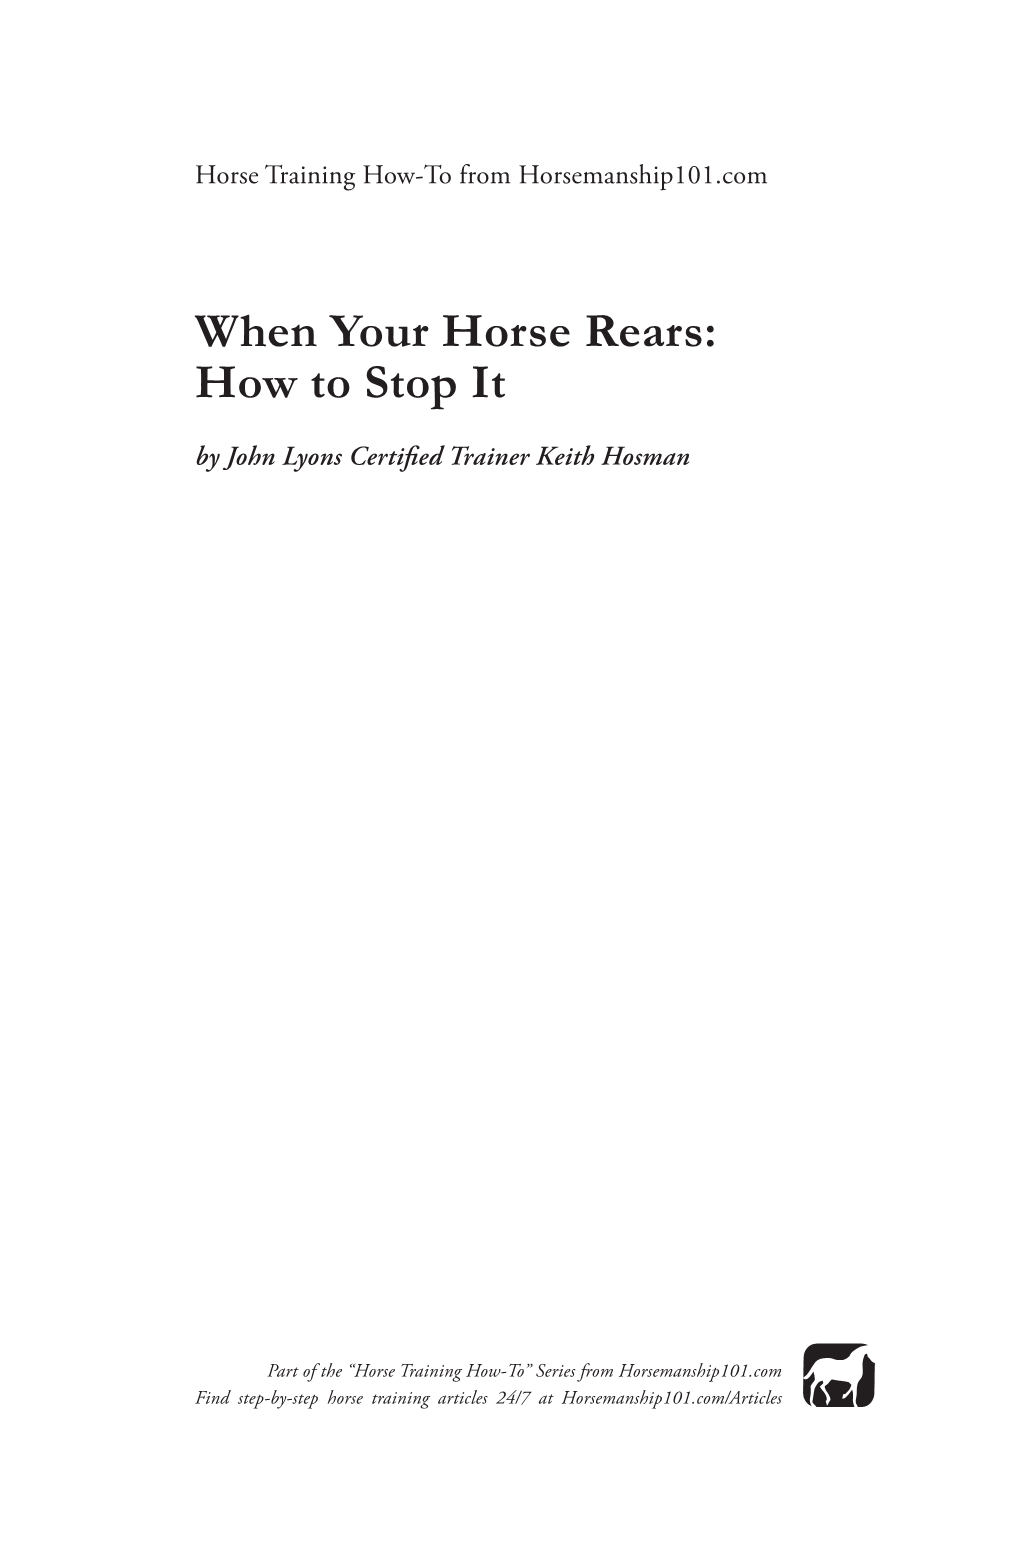 When Your Horse Rears: How to Stop It by John Lyons Certiﬁed Trainer Keith Hosman